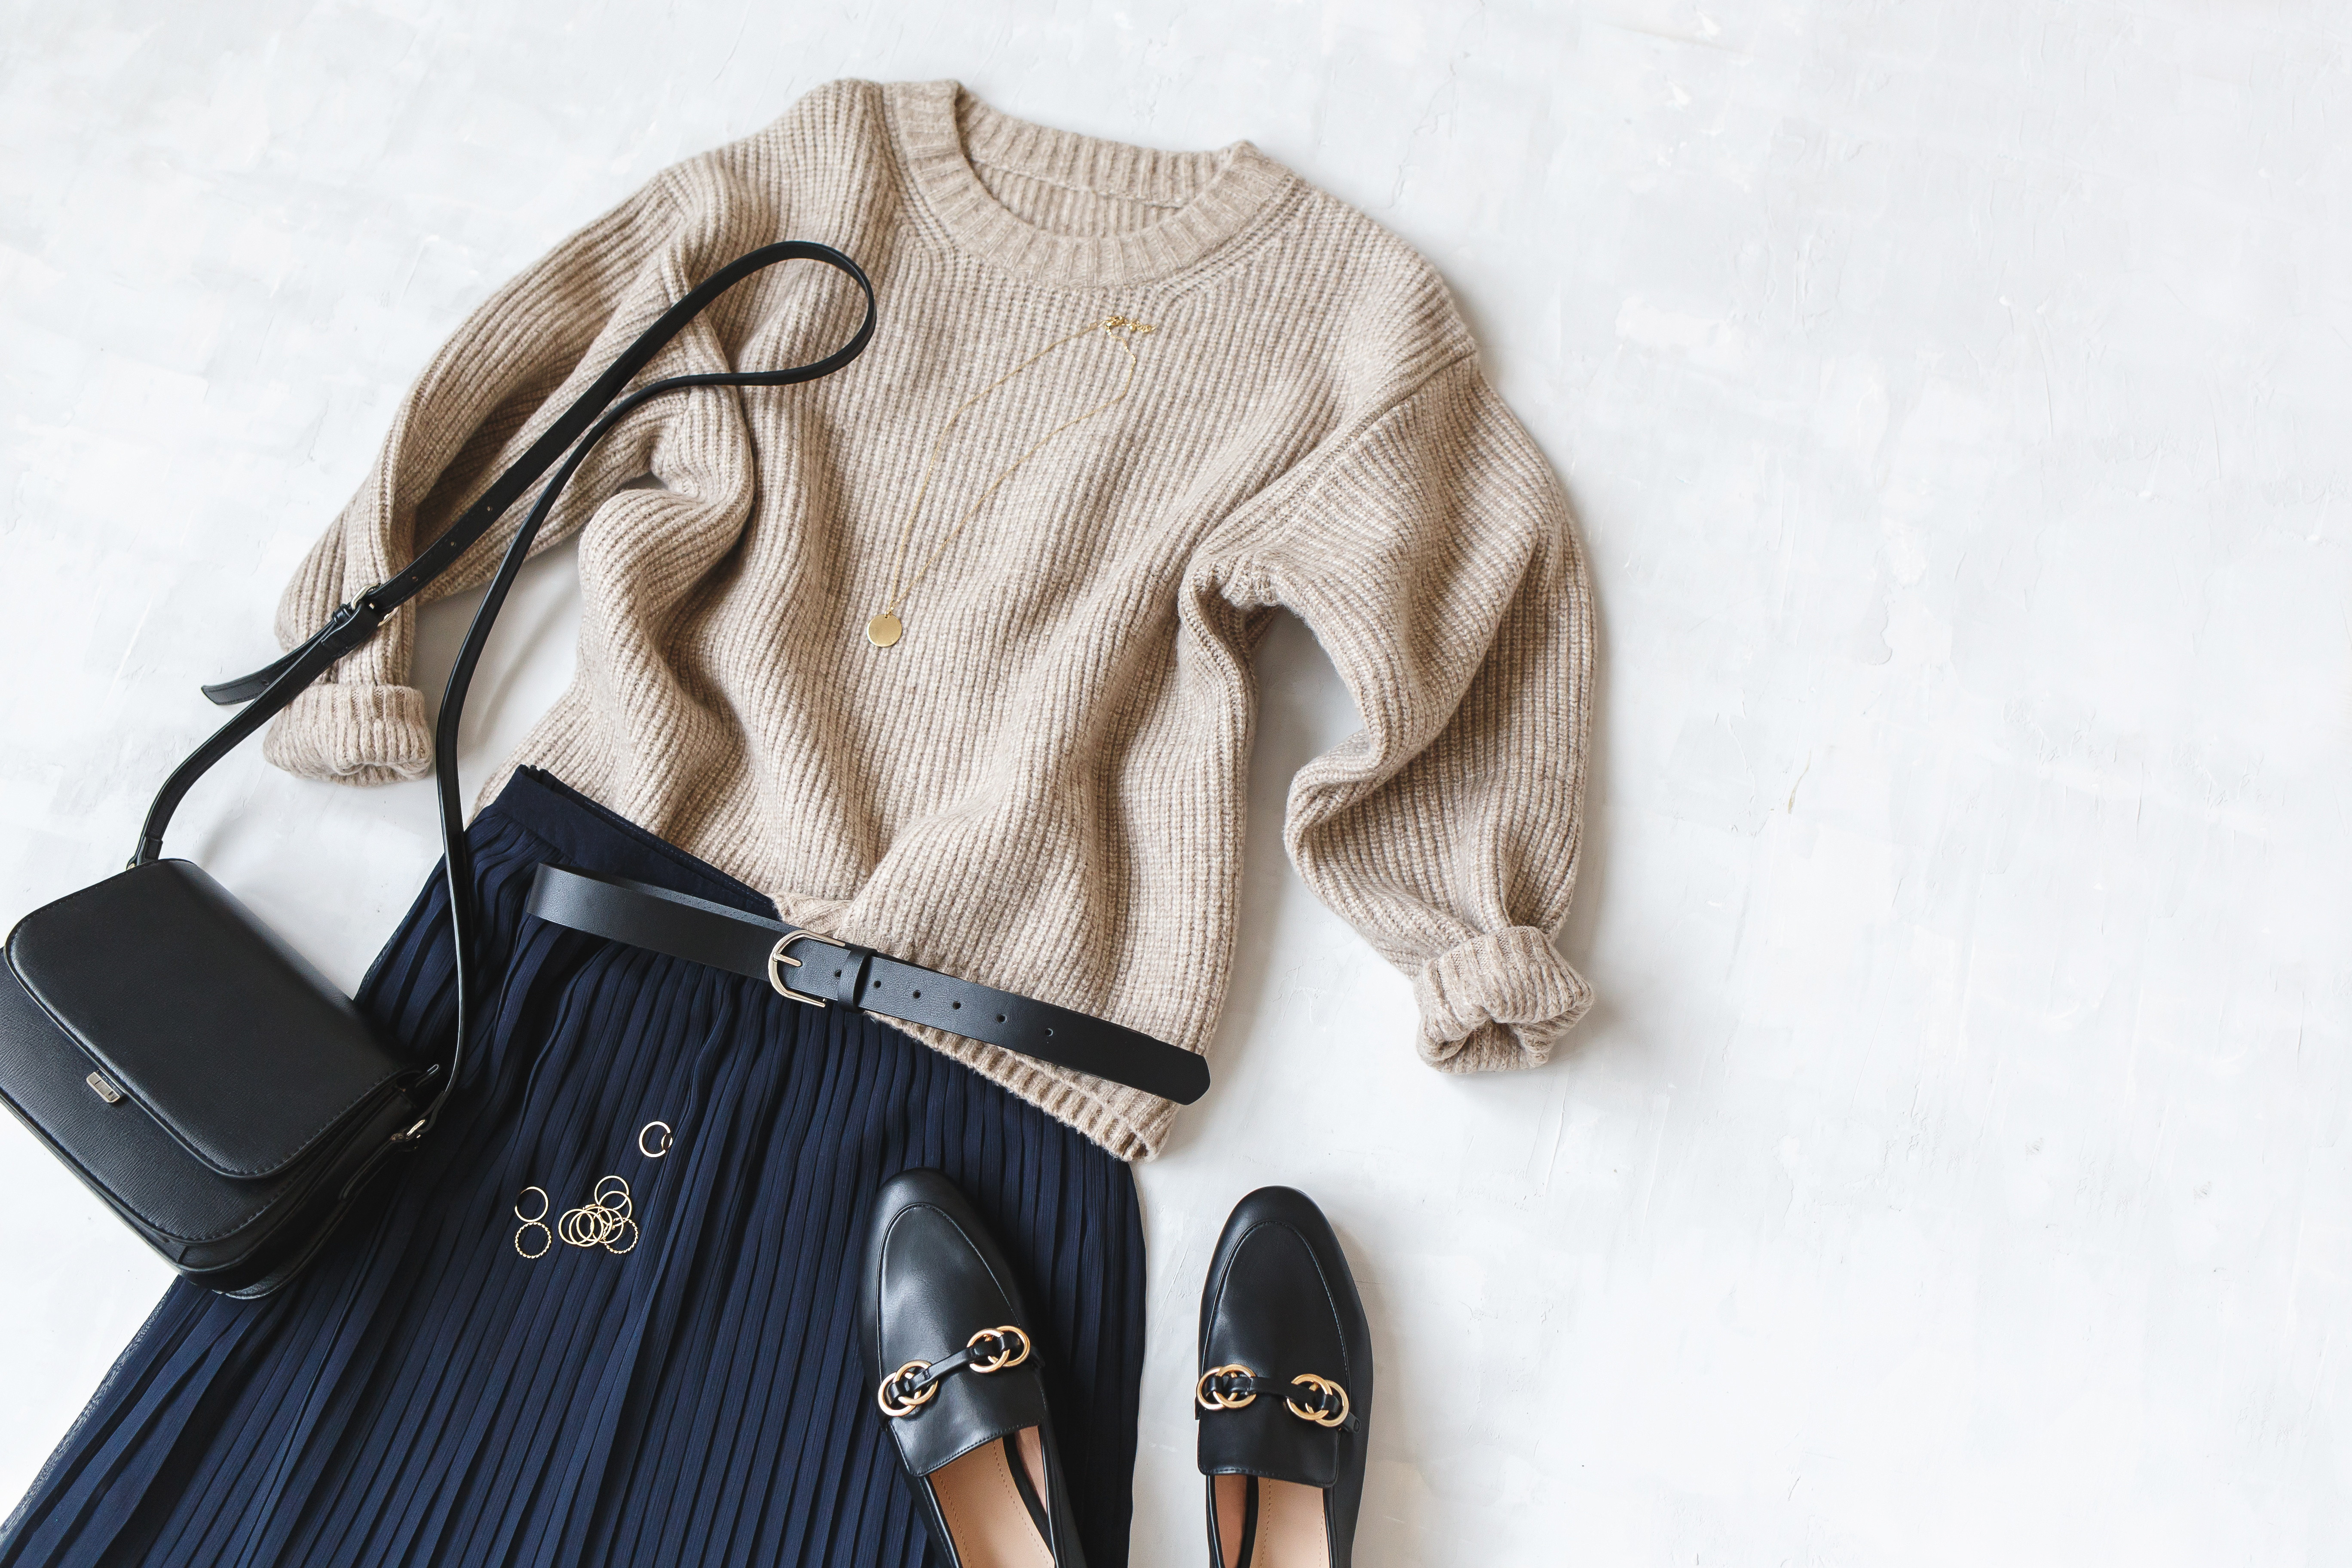 Blue midi pleated skirt, beige knitted sweater, small black cross body bag, belt, loafers (flat shoes) on grey background. Overhead view of women's casual day outfit. Flat lay, top view. Women clothes